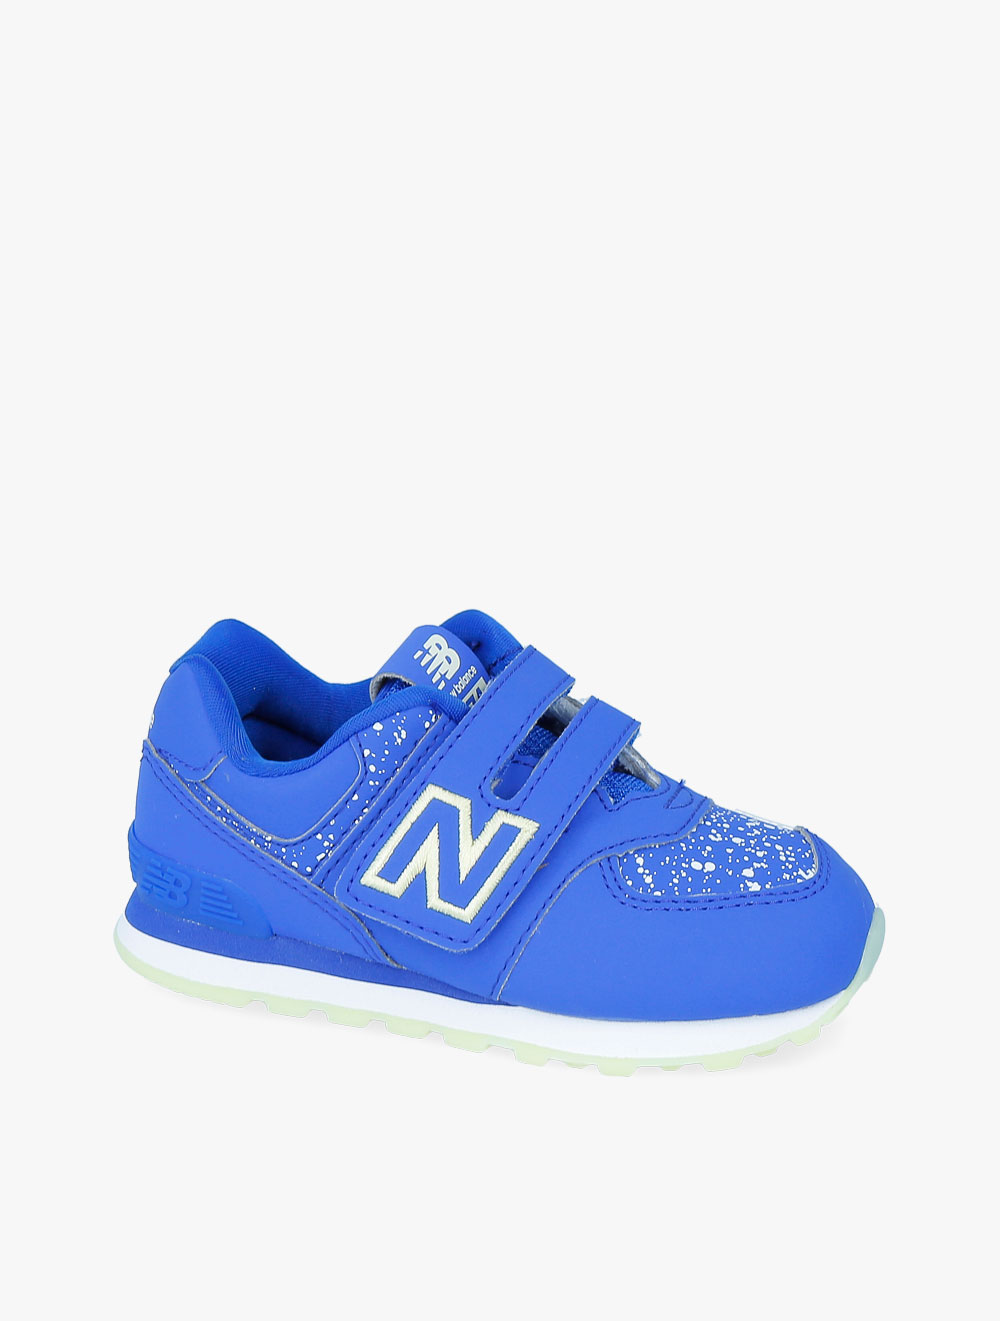 New Balance 574 Glow In The Dark Boys Shoes